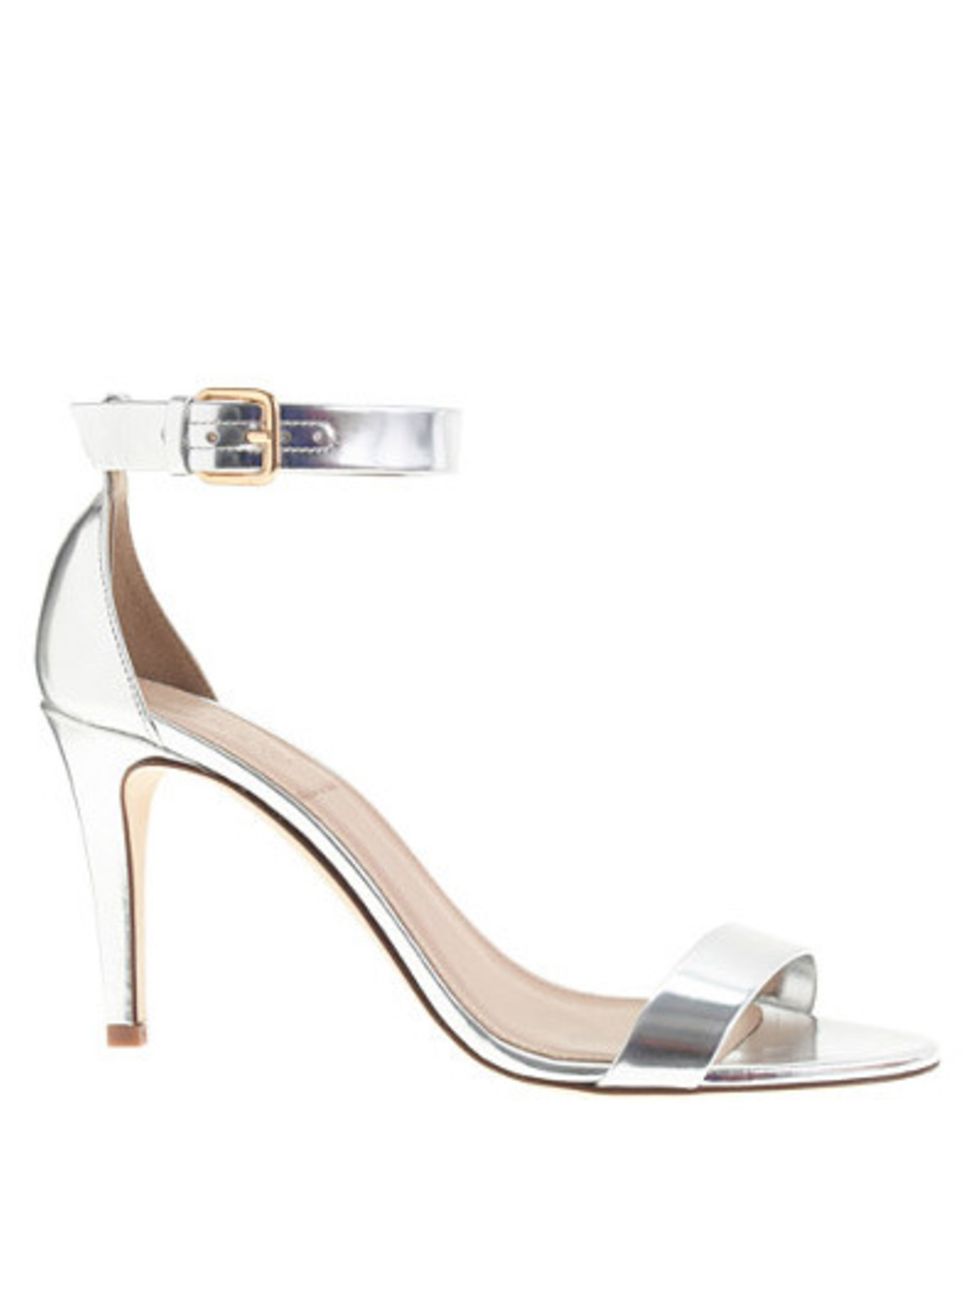 Product, White, Cable, Tan, Foot, High heels, Beige, Composite material, Sandal, Metal, 